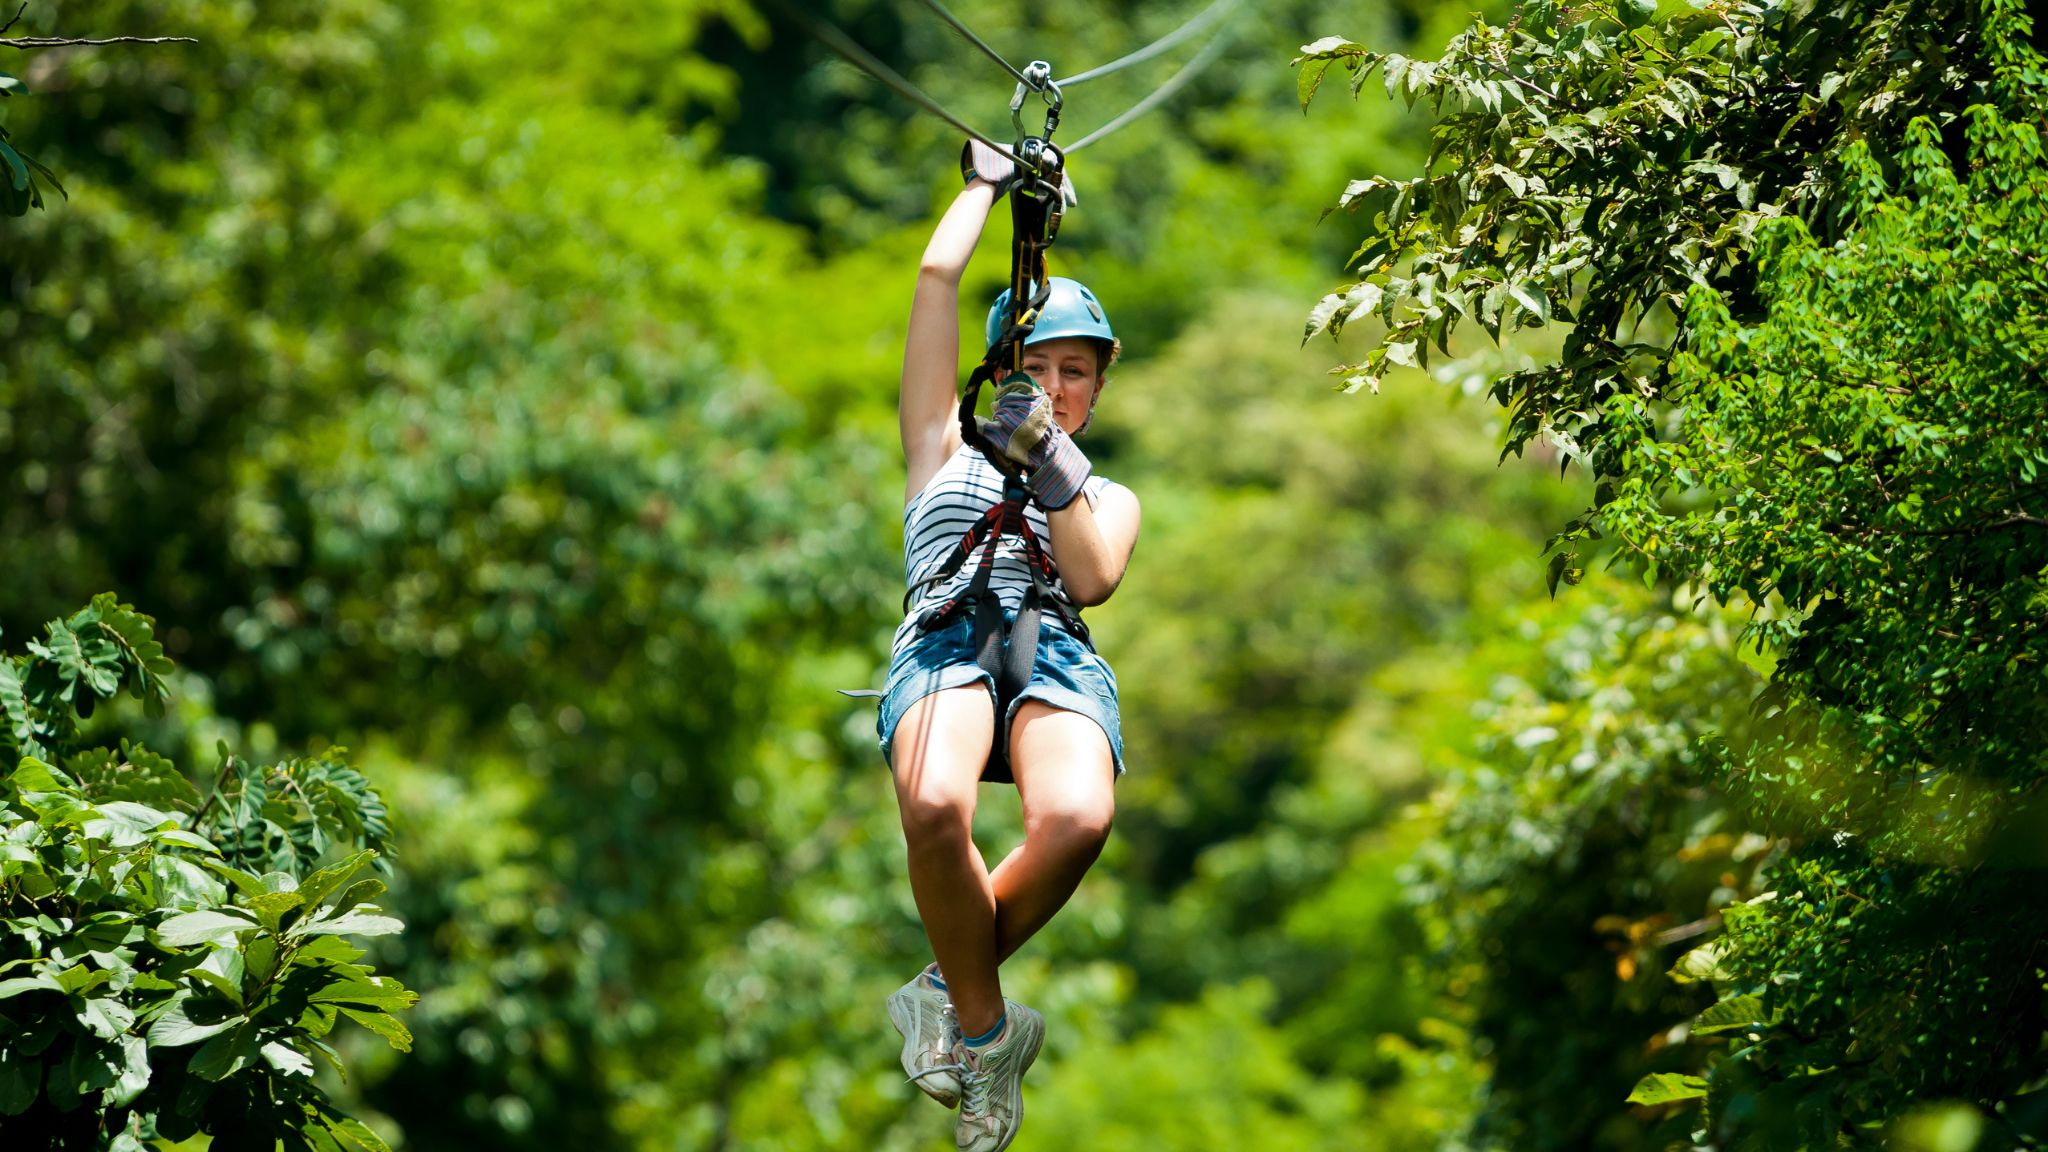 Day 3 Join The Most Exciting Zip Lining Journey